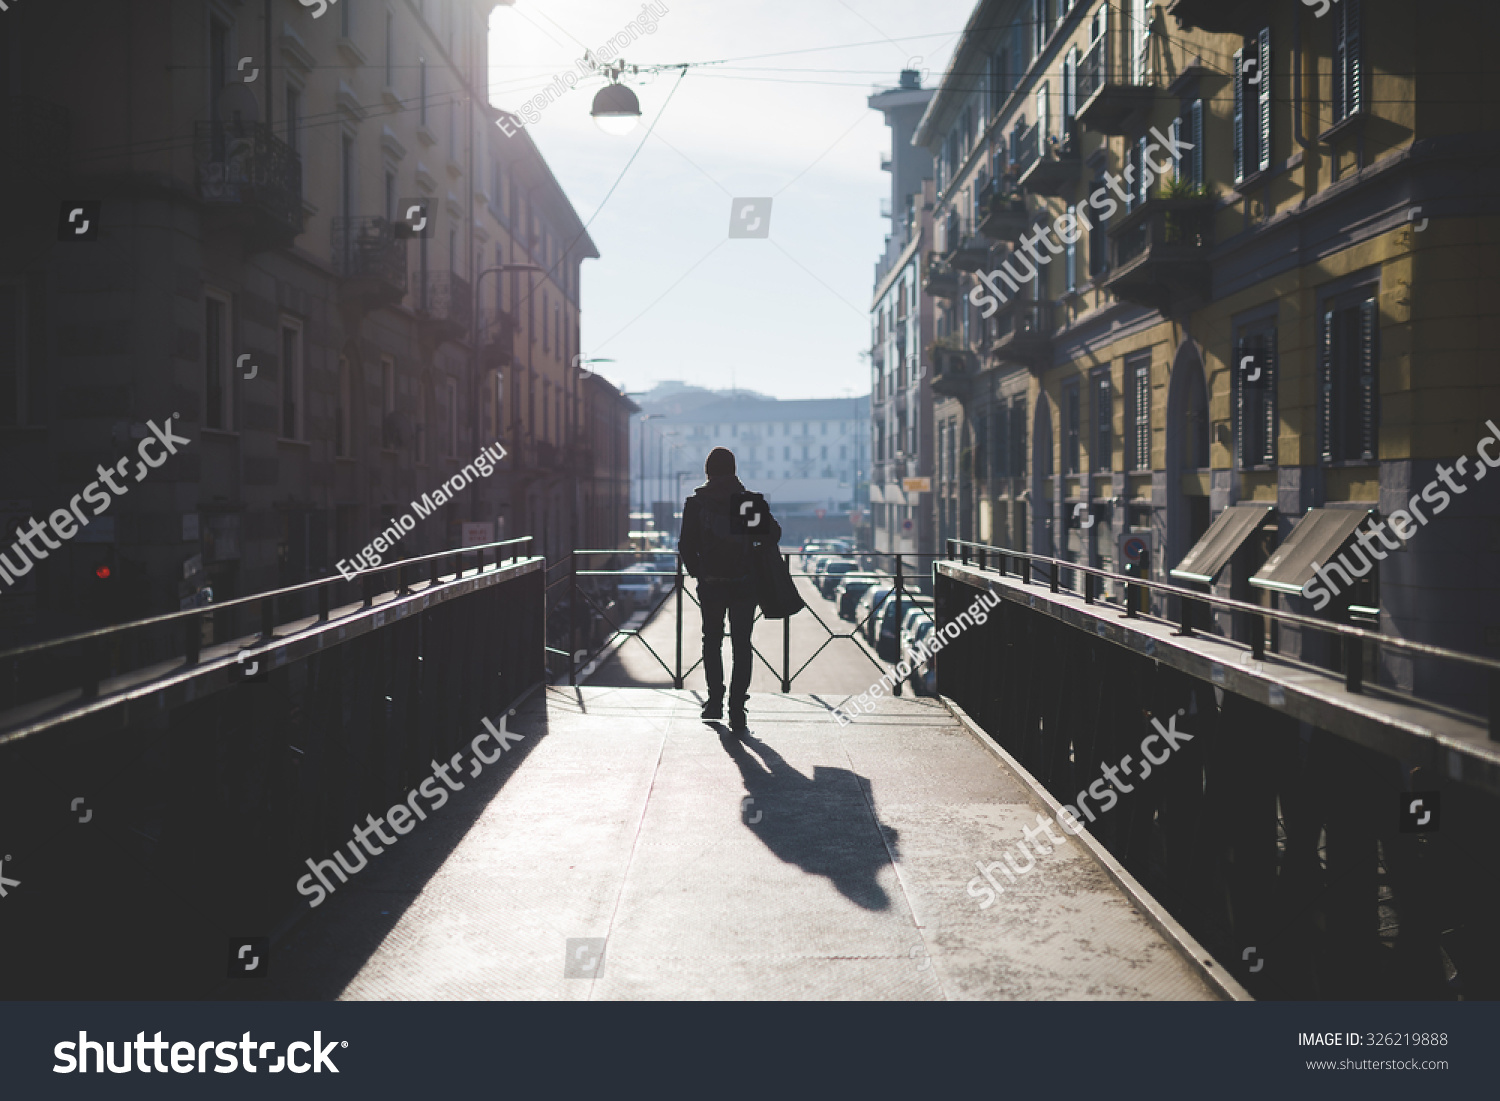 urban blurred landscape of Milan Navigli background during sunset in winter with a figure walking on a bridge #326219888